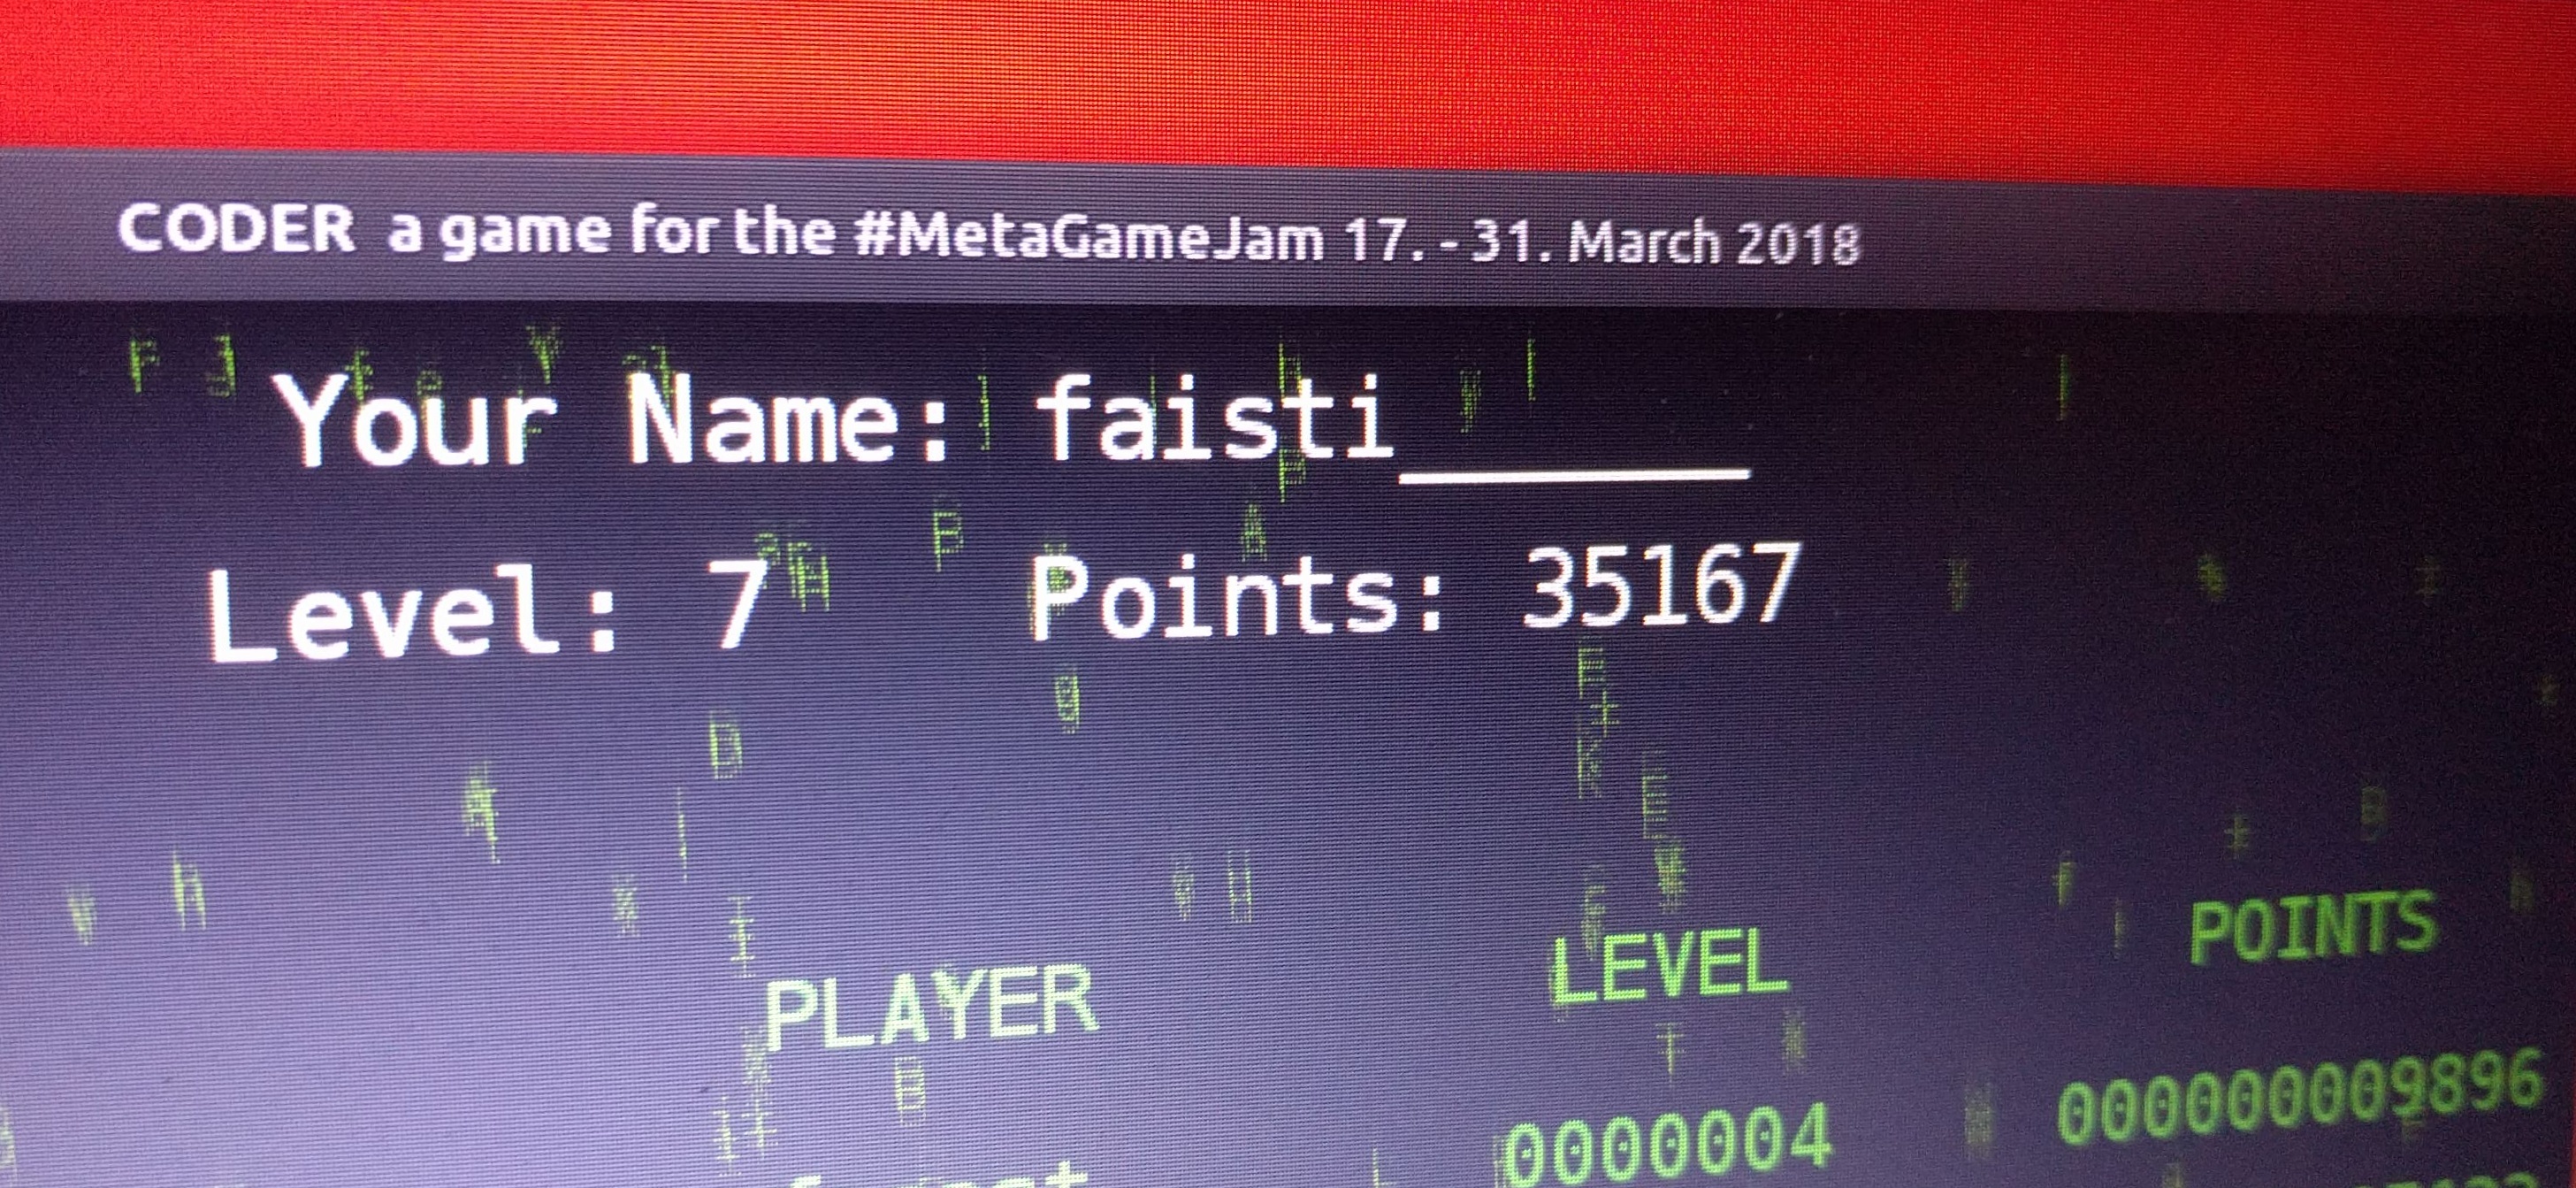 Coding game. Game Coder программа. Meta game Jam. Points for Level of the game. Game code win